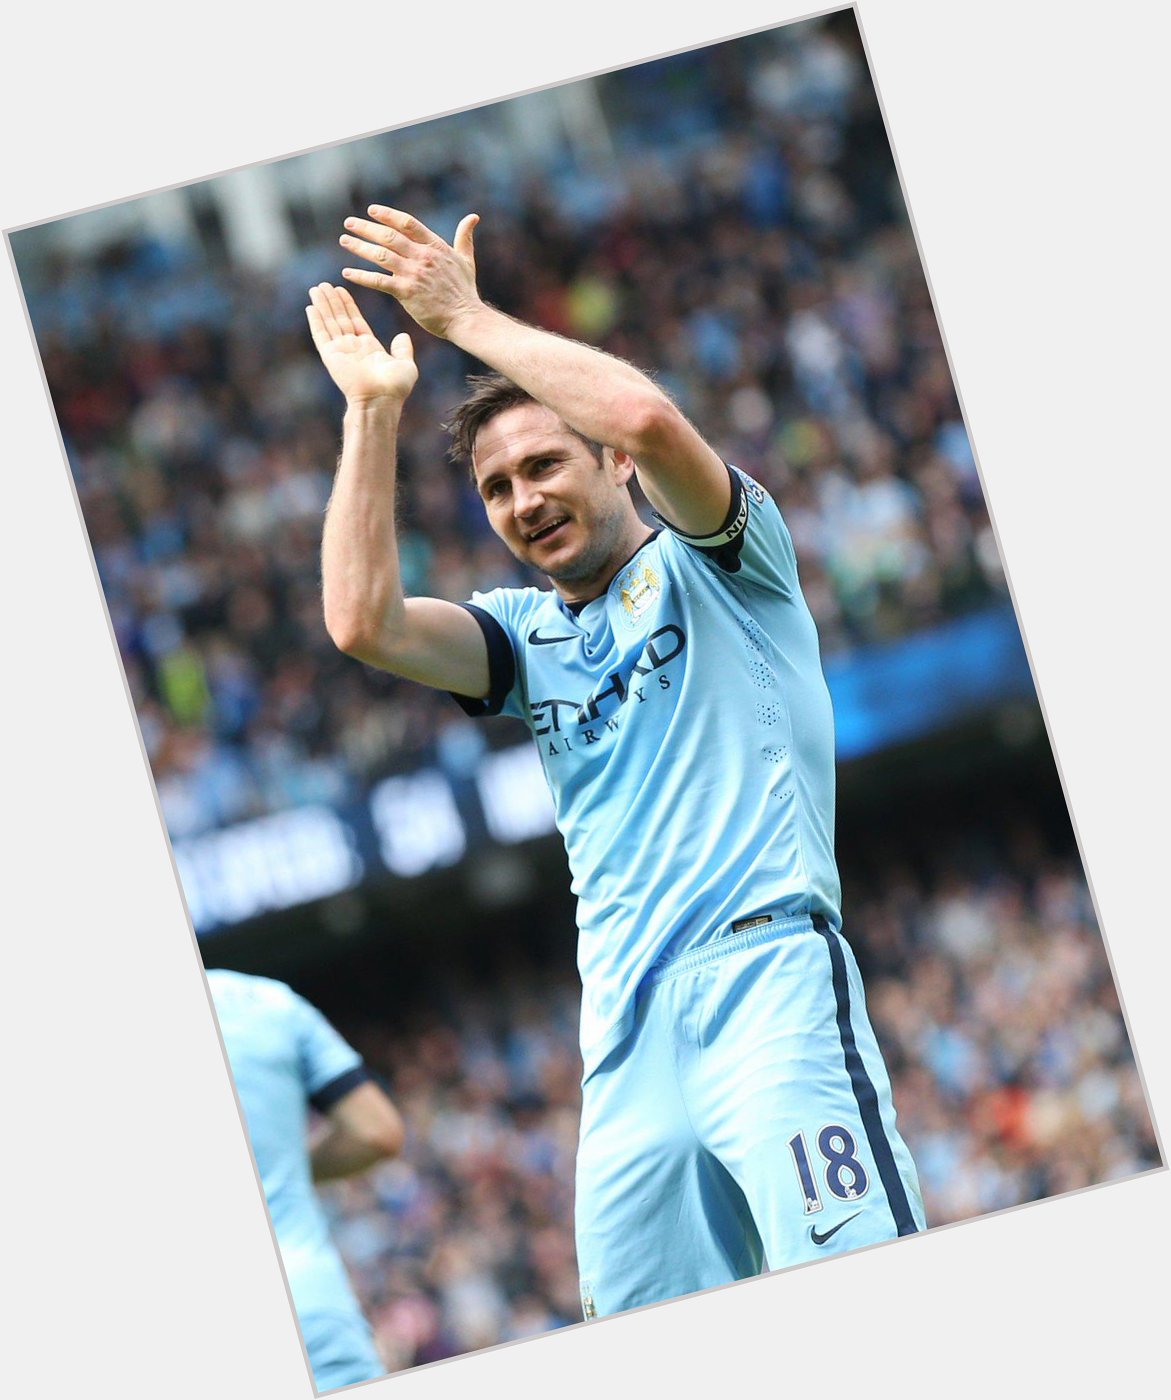 Wishing Frank Lampard a very happy 37th birthday today!  